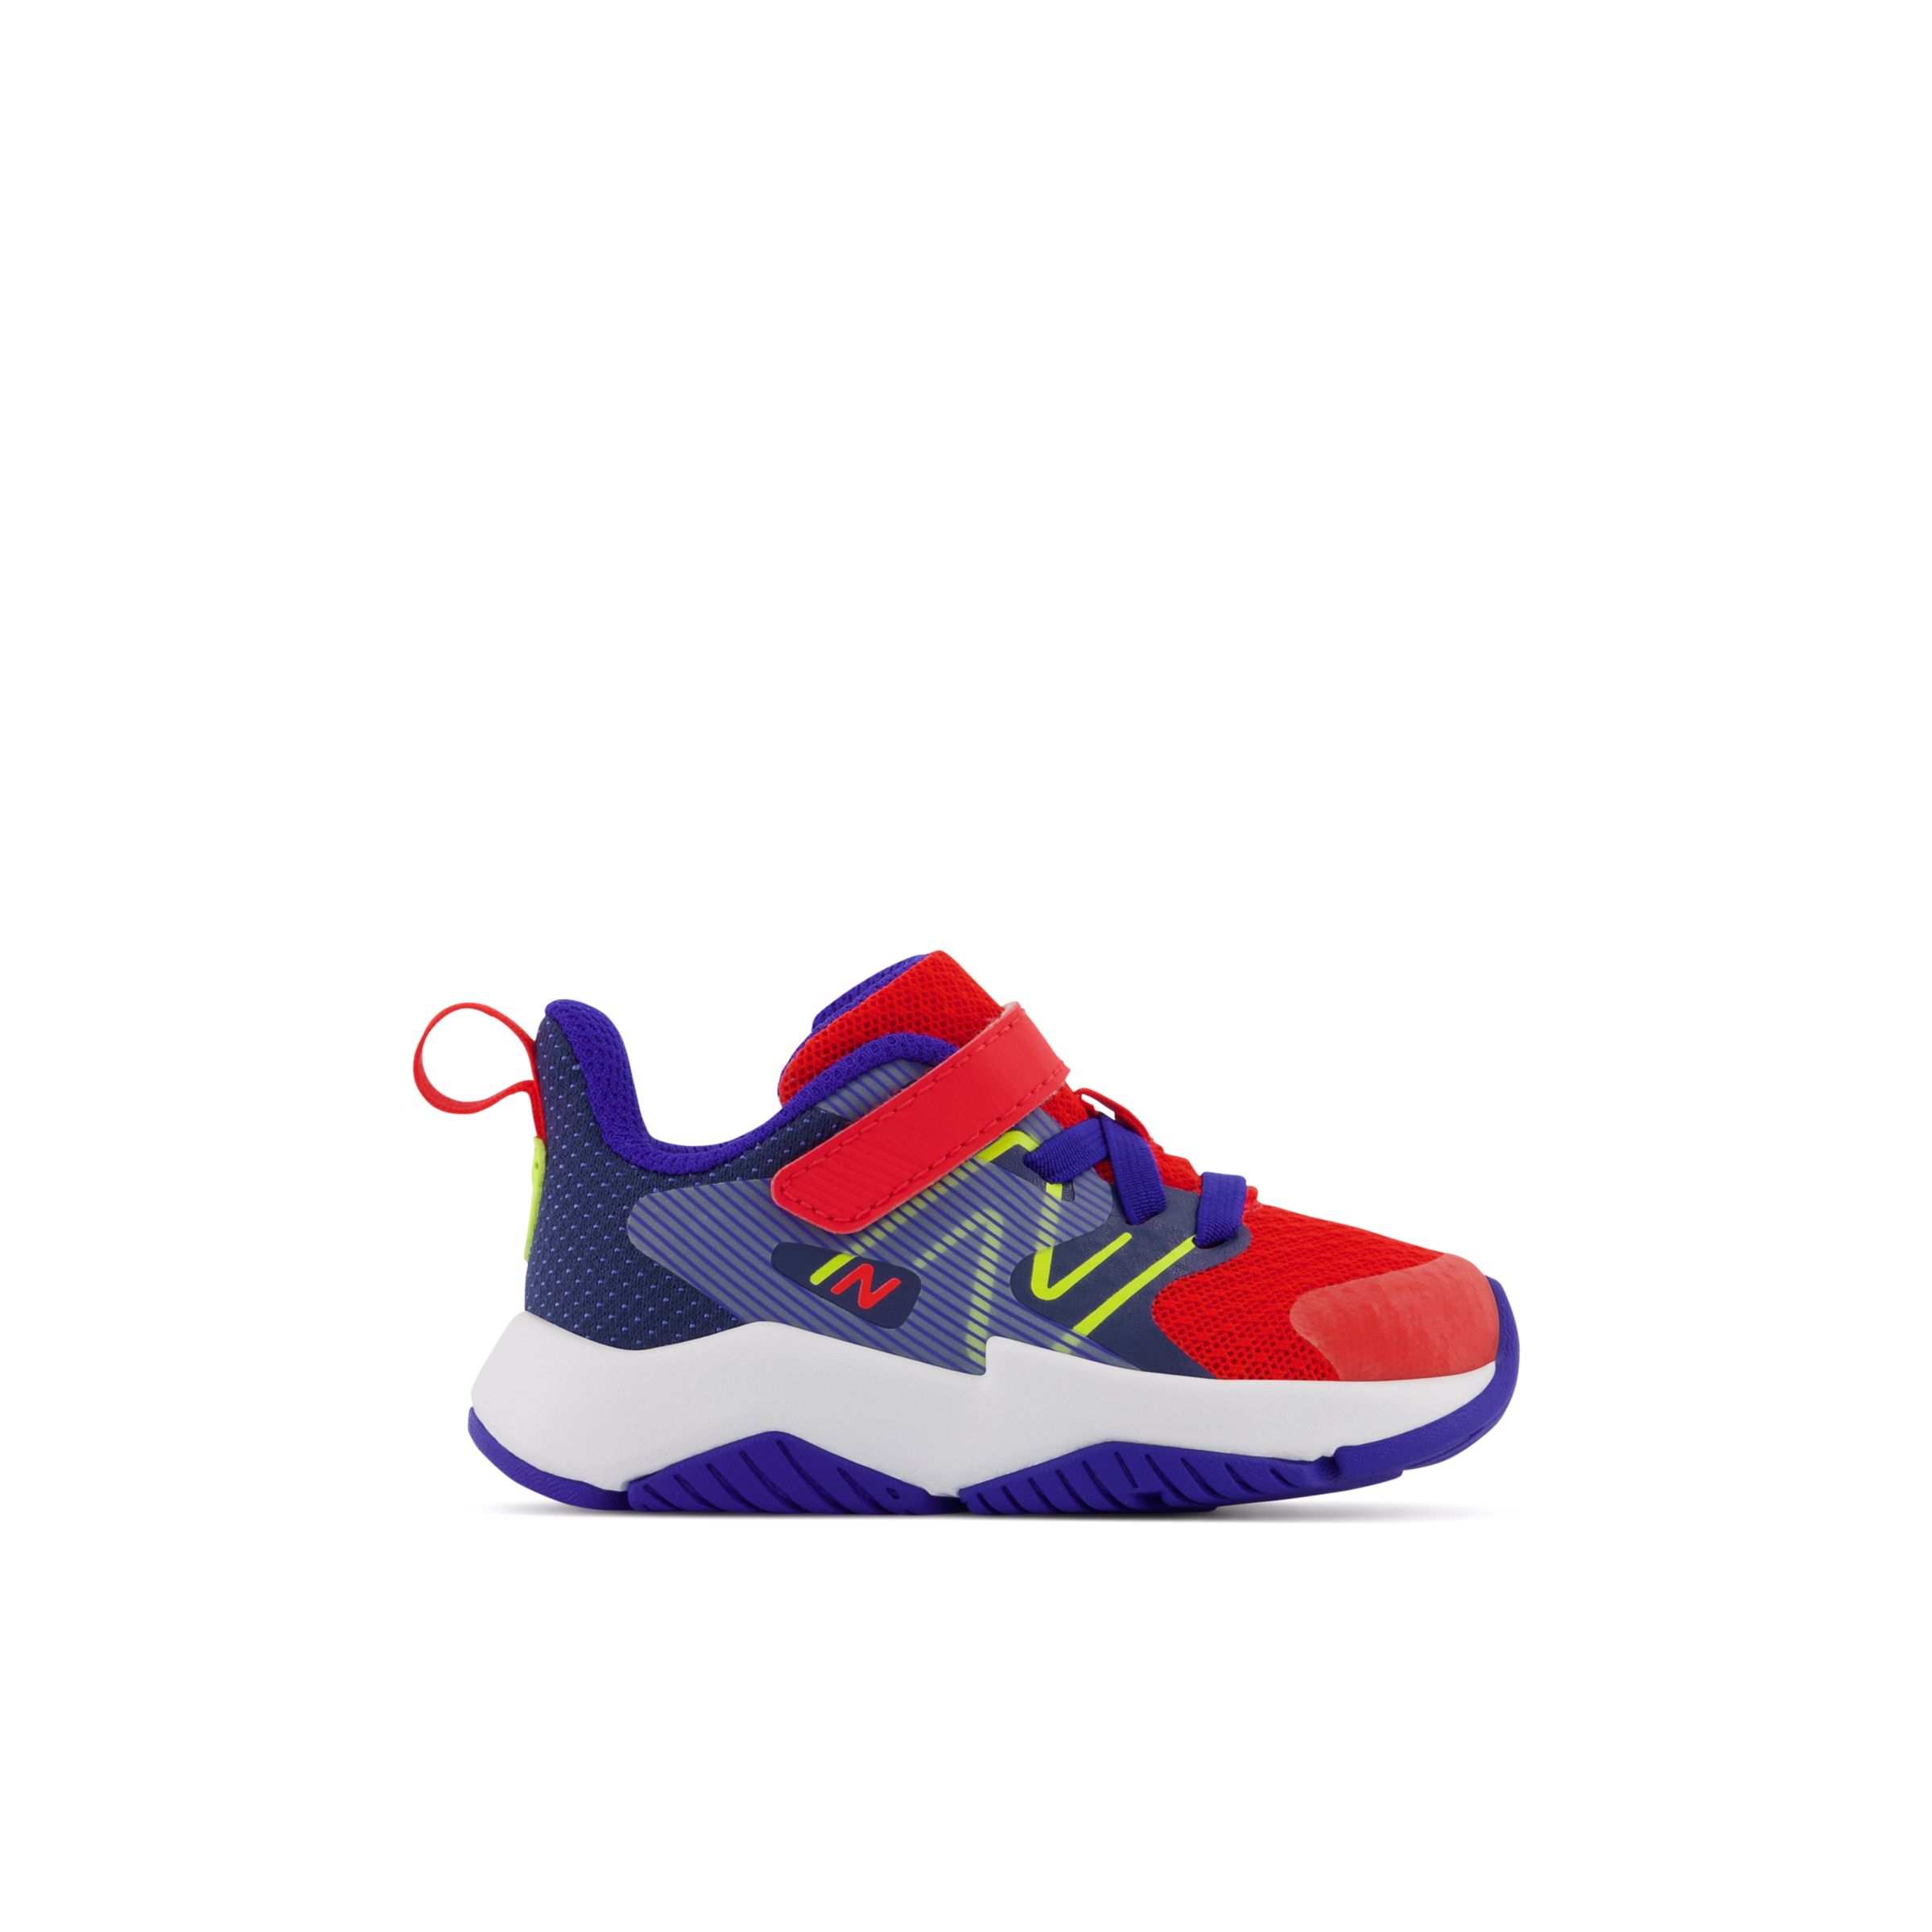 

New Balance Kids' Rave Run v2 Bungee Lace with Top Strap Red/Yellow/Blue - Red/Yellow/Blue